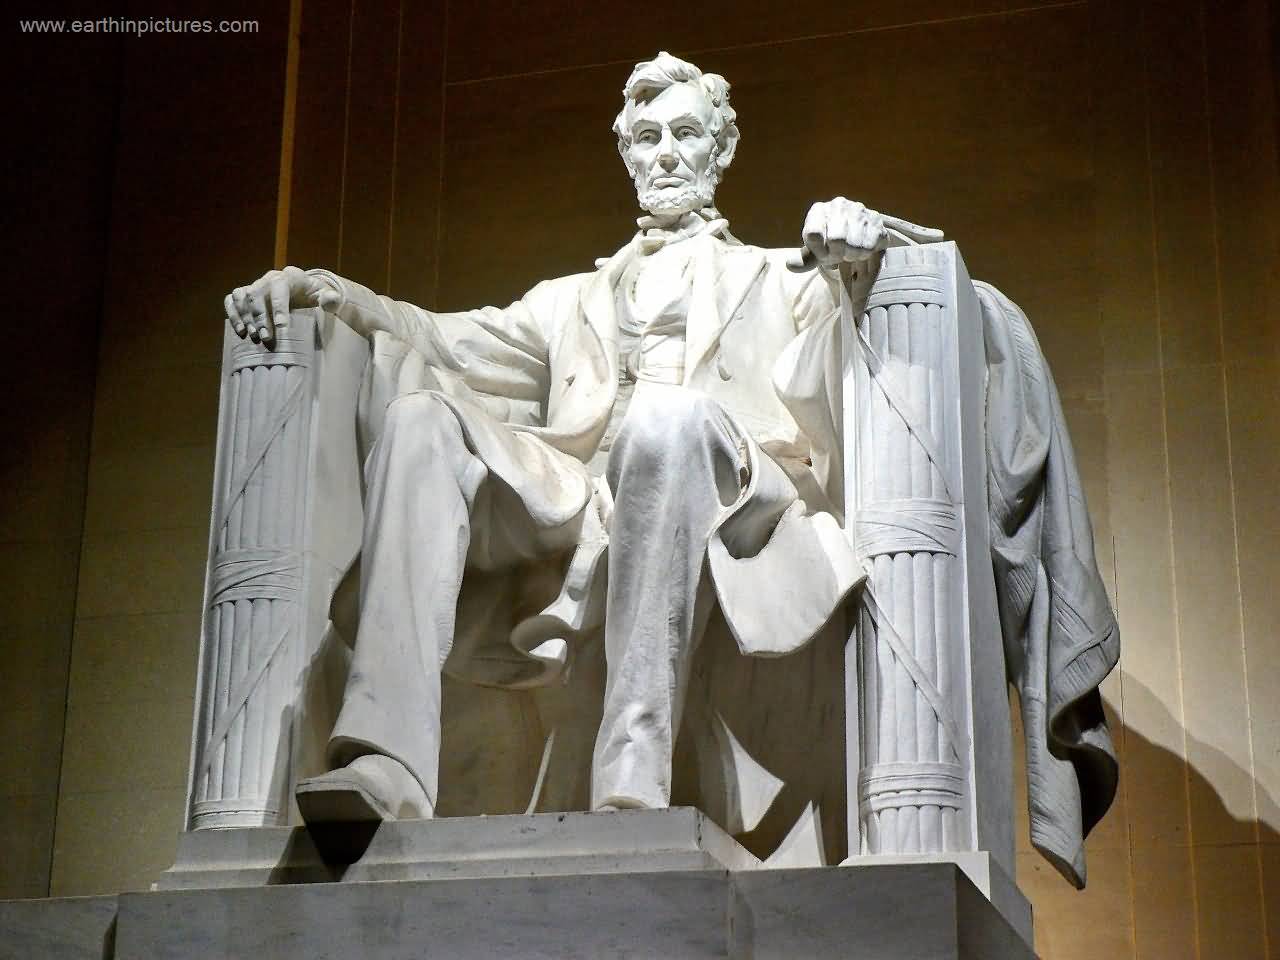 Statue Of Abraham Lincoln Inside The Lincoln Memorial